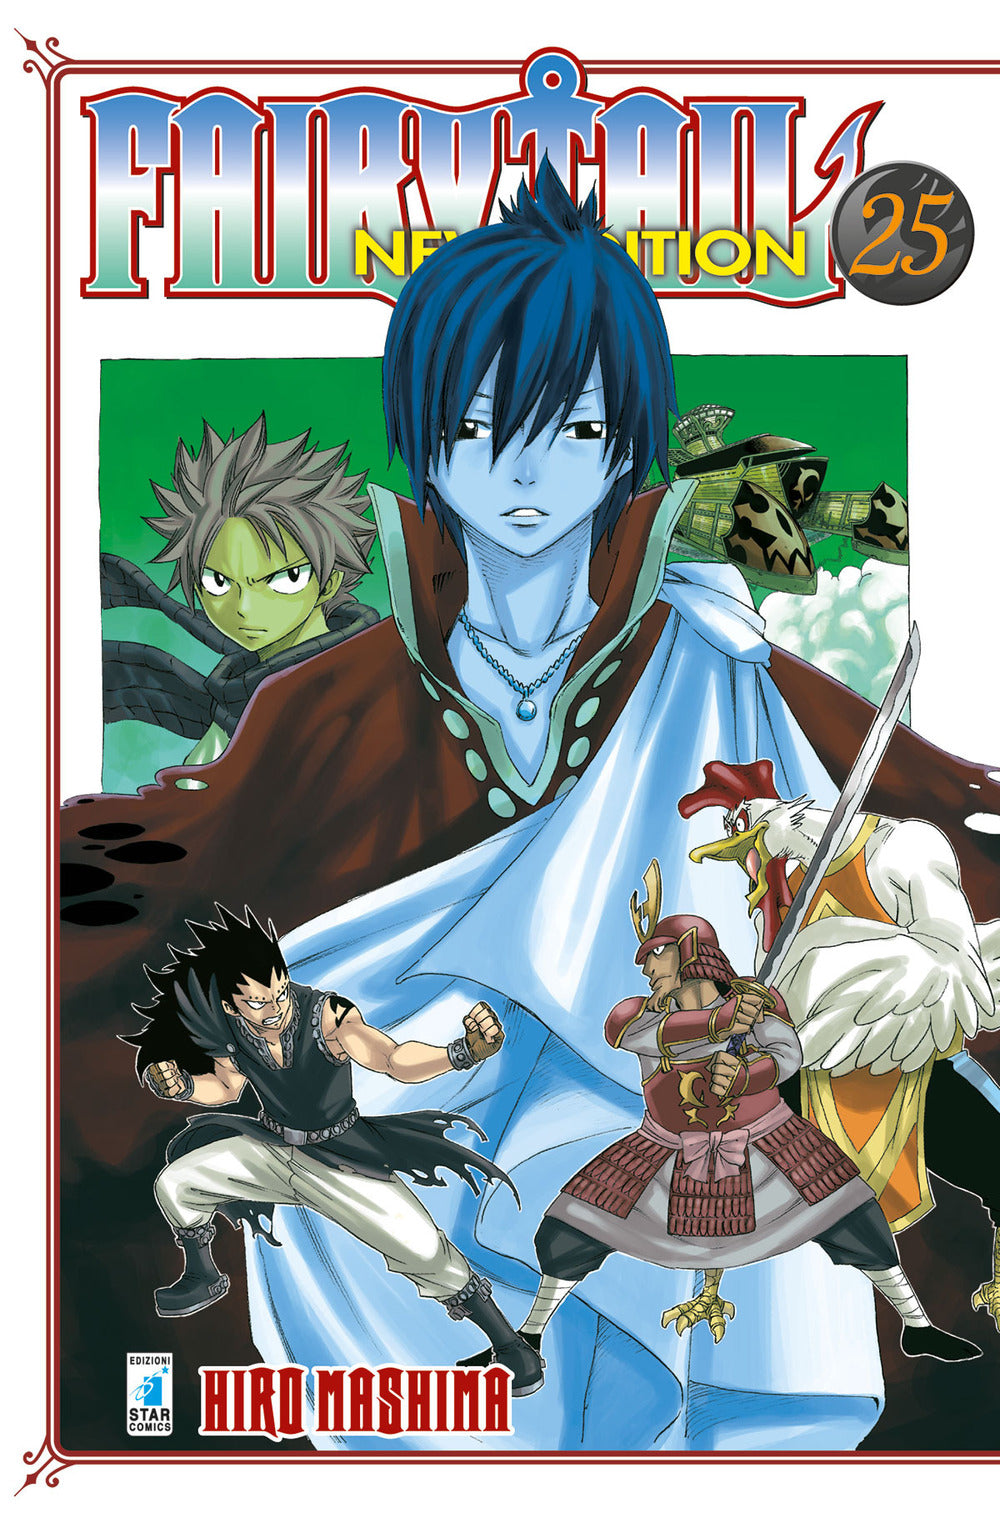 Fairy Tail. New edition. Vol. 25.